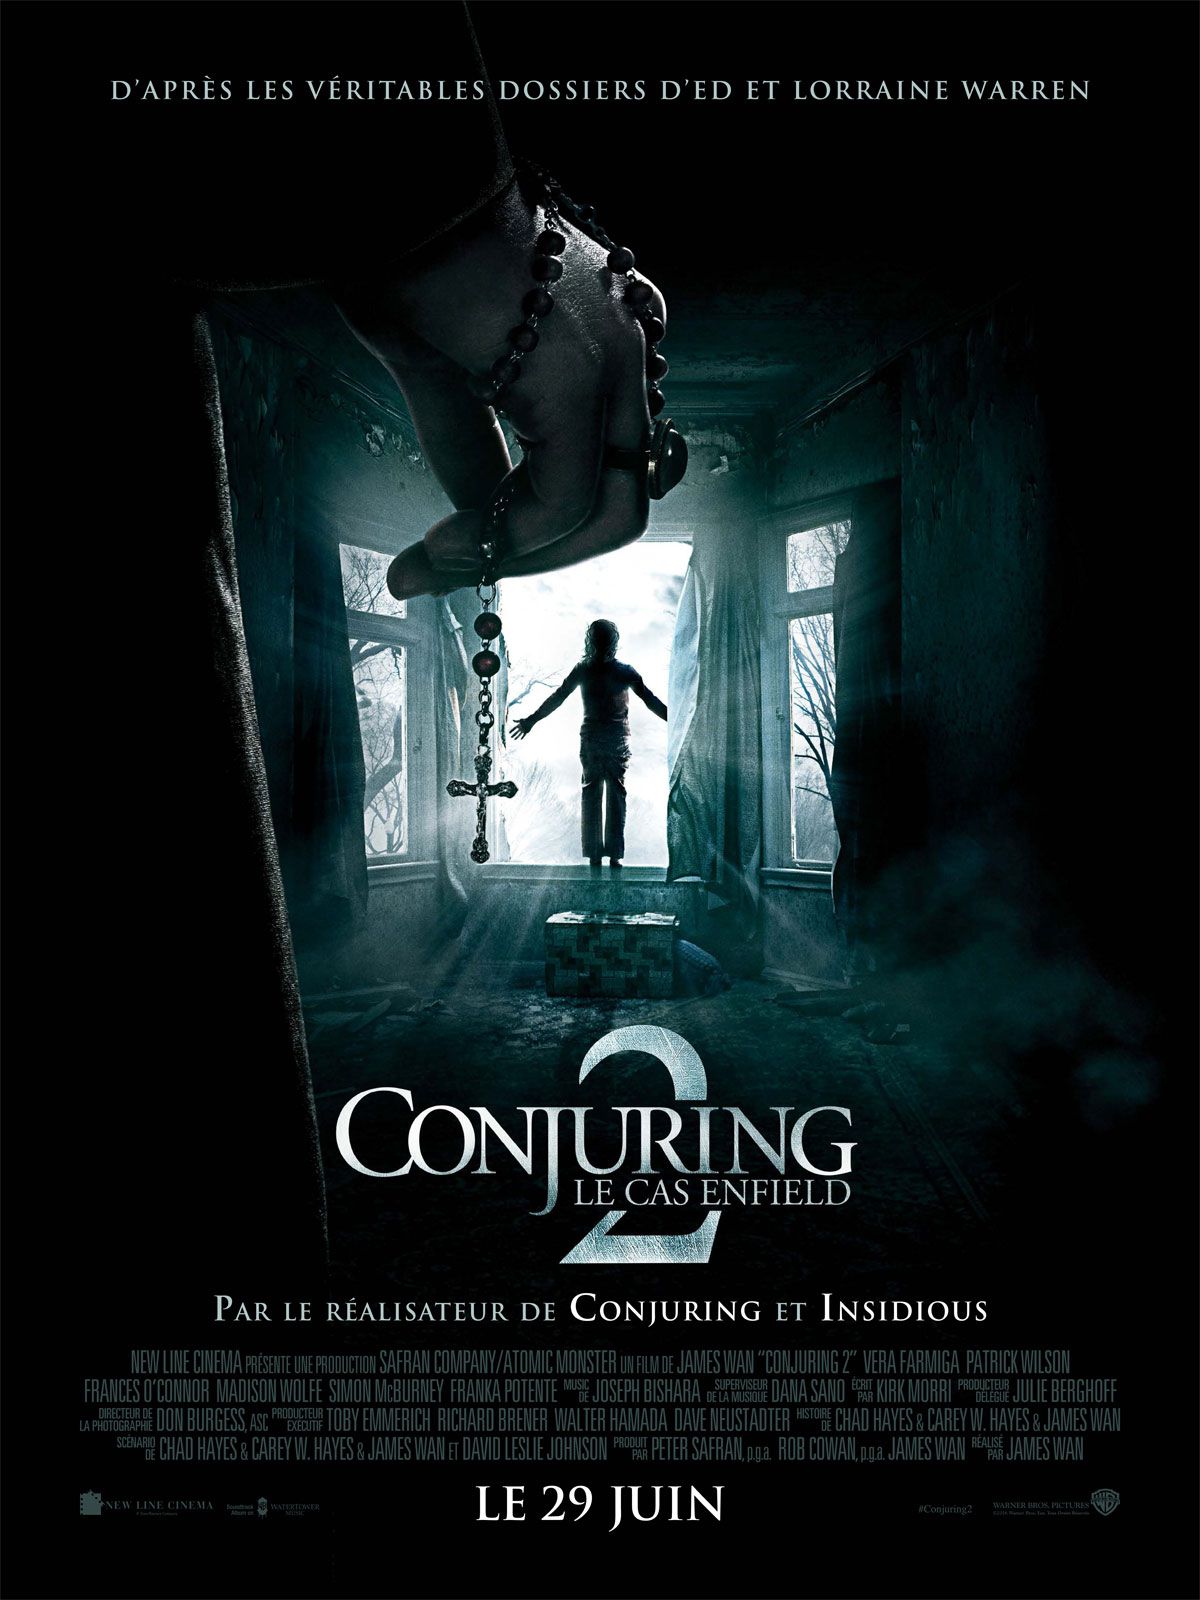 Conjuring 2 : Le Cas Enfield - Film (2016) streaming VF gratuit complet